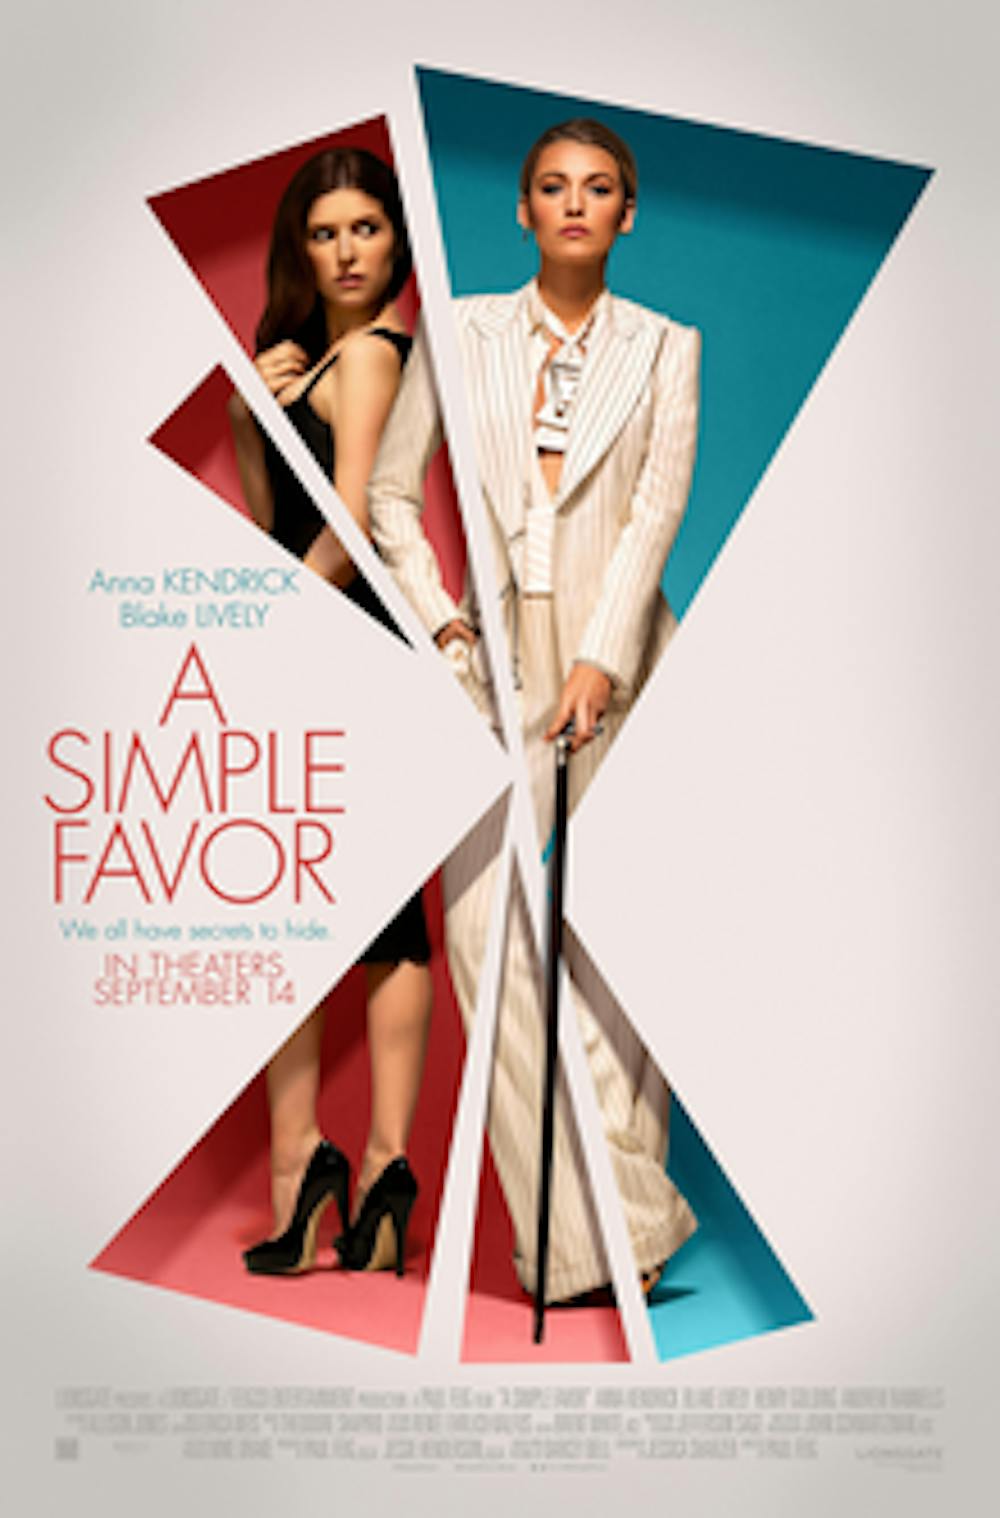 <p>“A Simple Favor” follows Stephanie Smothers, played by Anna Kendrick, when her best friend Emily Nelson, played by Blake Lively, goes missing.&nbsp;</p>